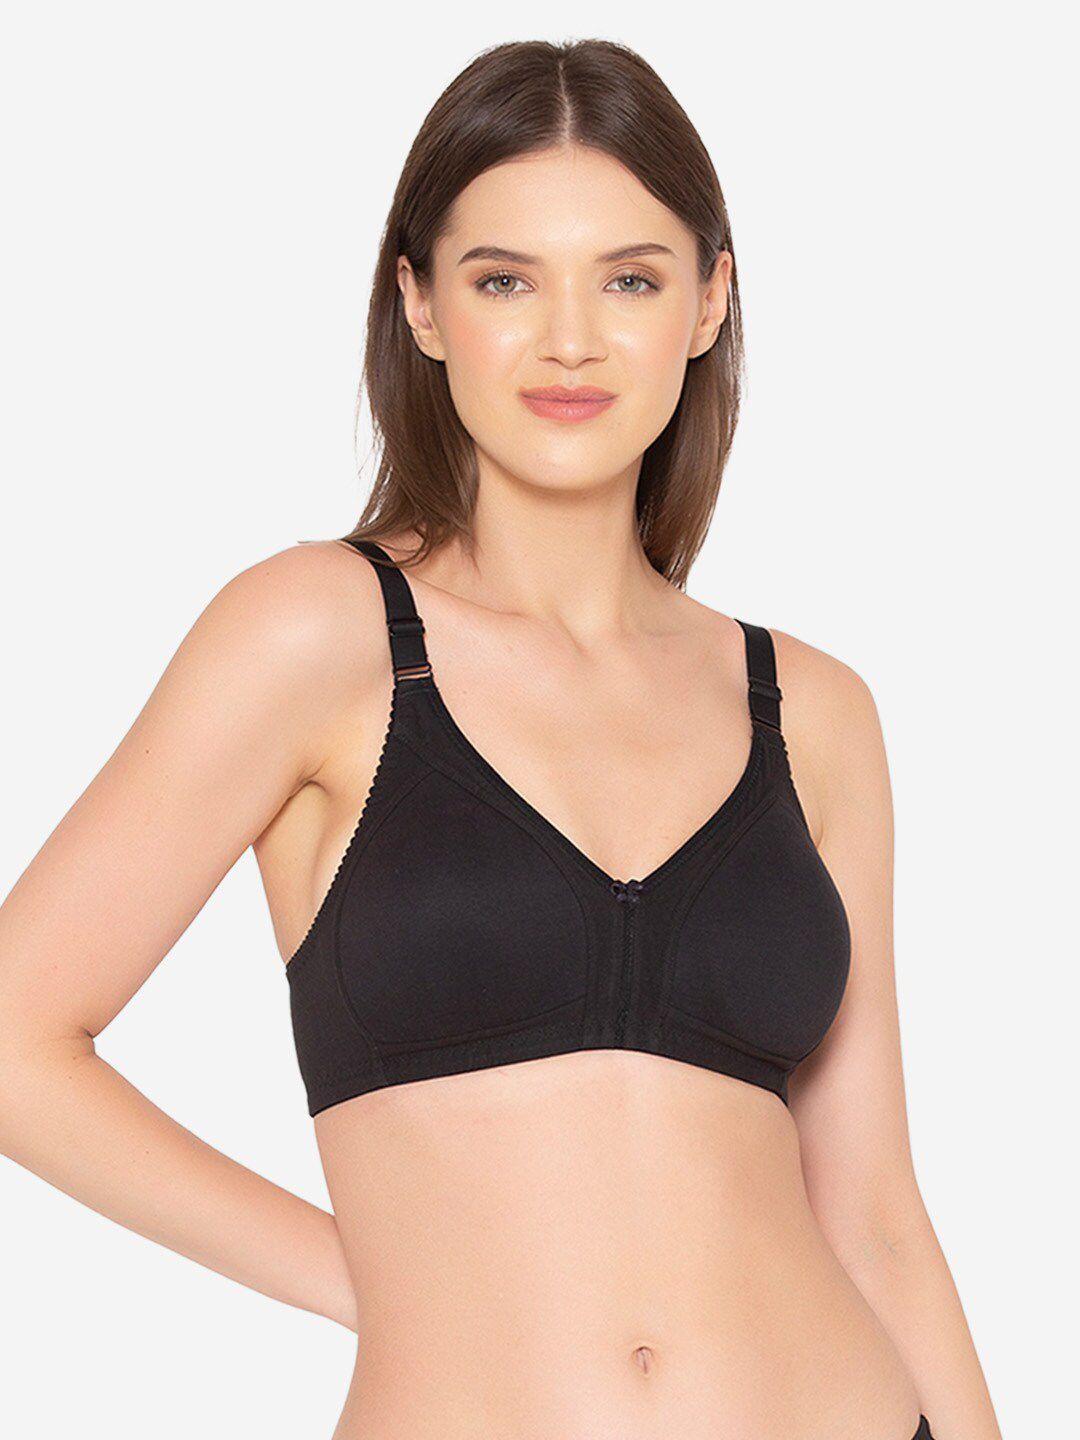 groversons-paris-beauty-full-coverage-everyday-bra-with-all-day-comfort